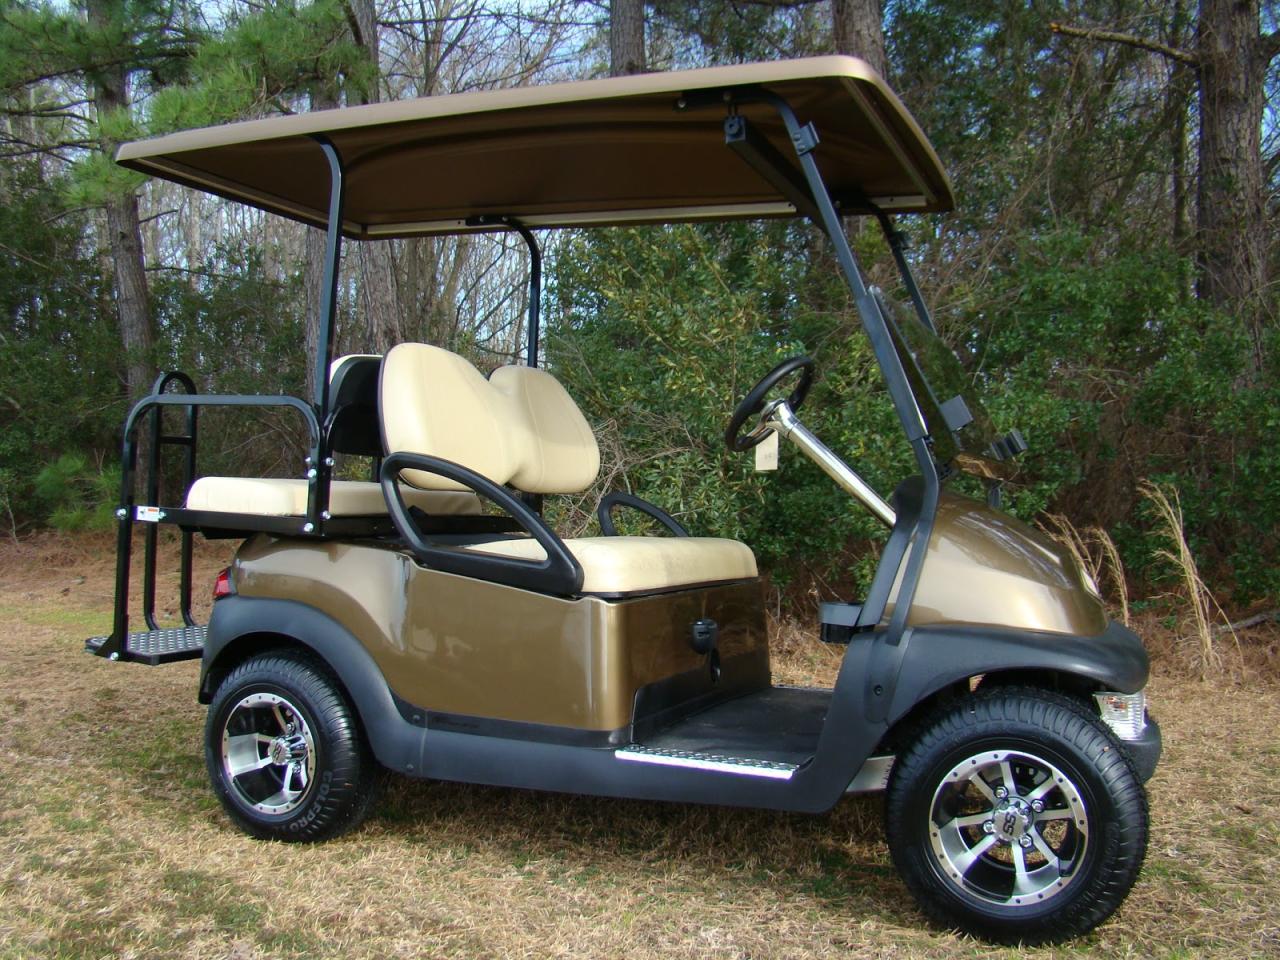 Used Golf Carts for Sale by Owner in Linn, Kansas: Your Affordable Ride to Adventure